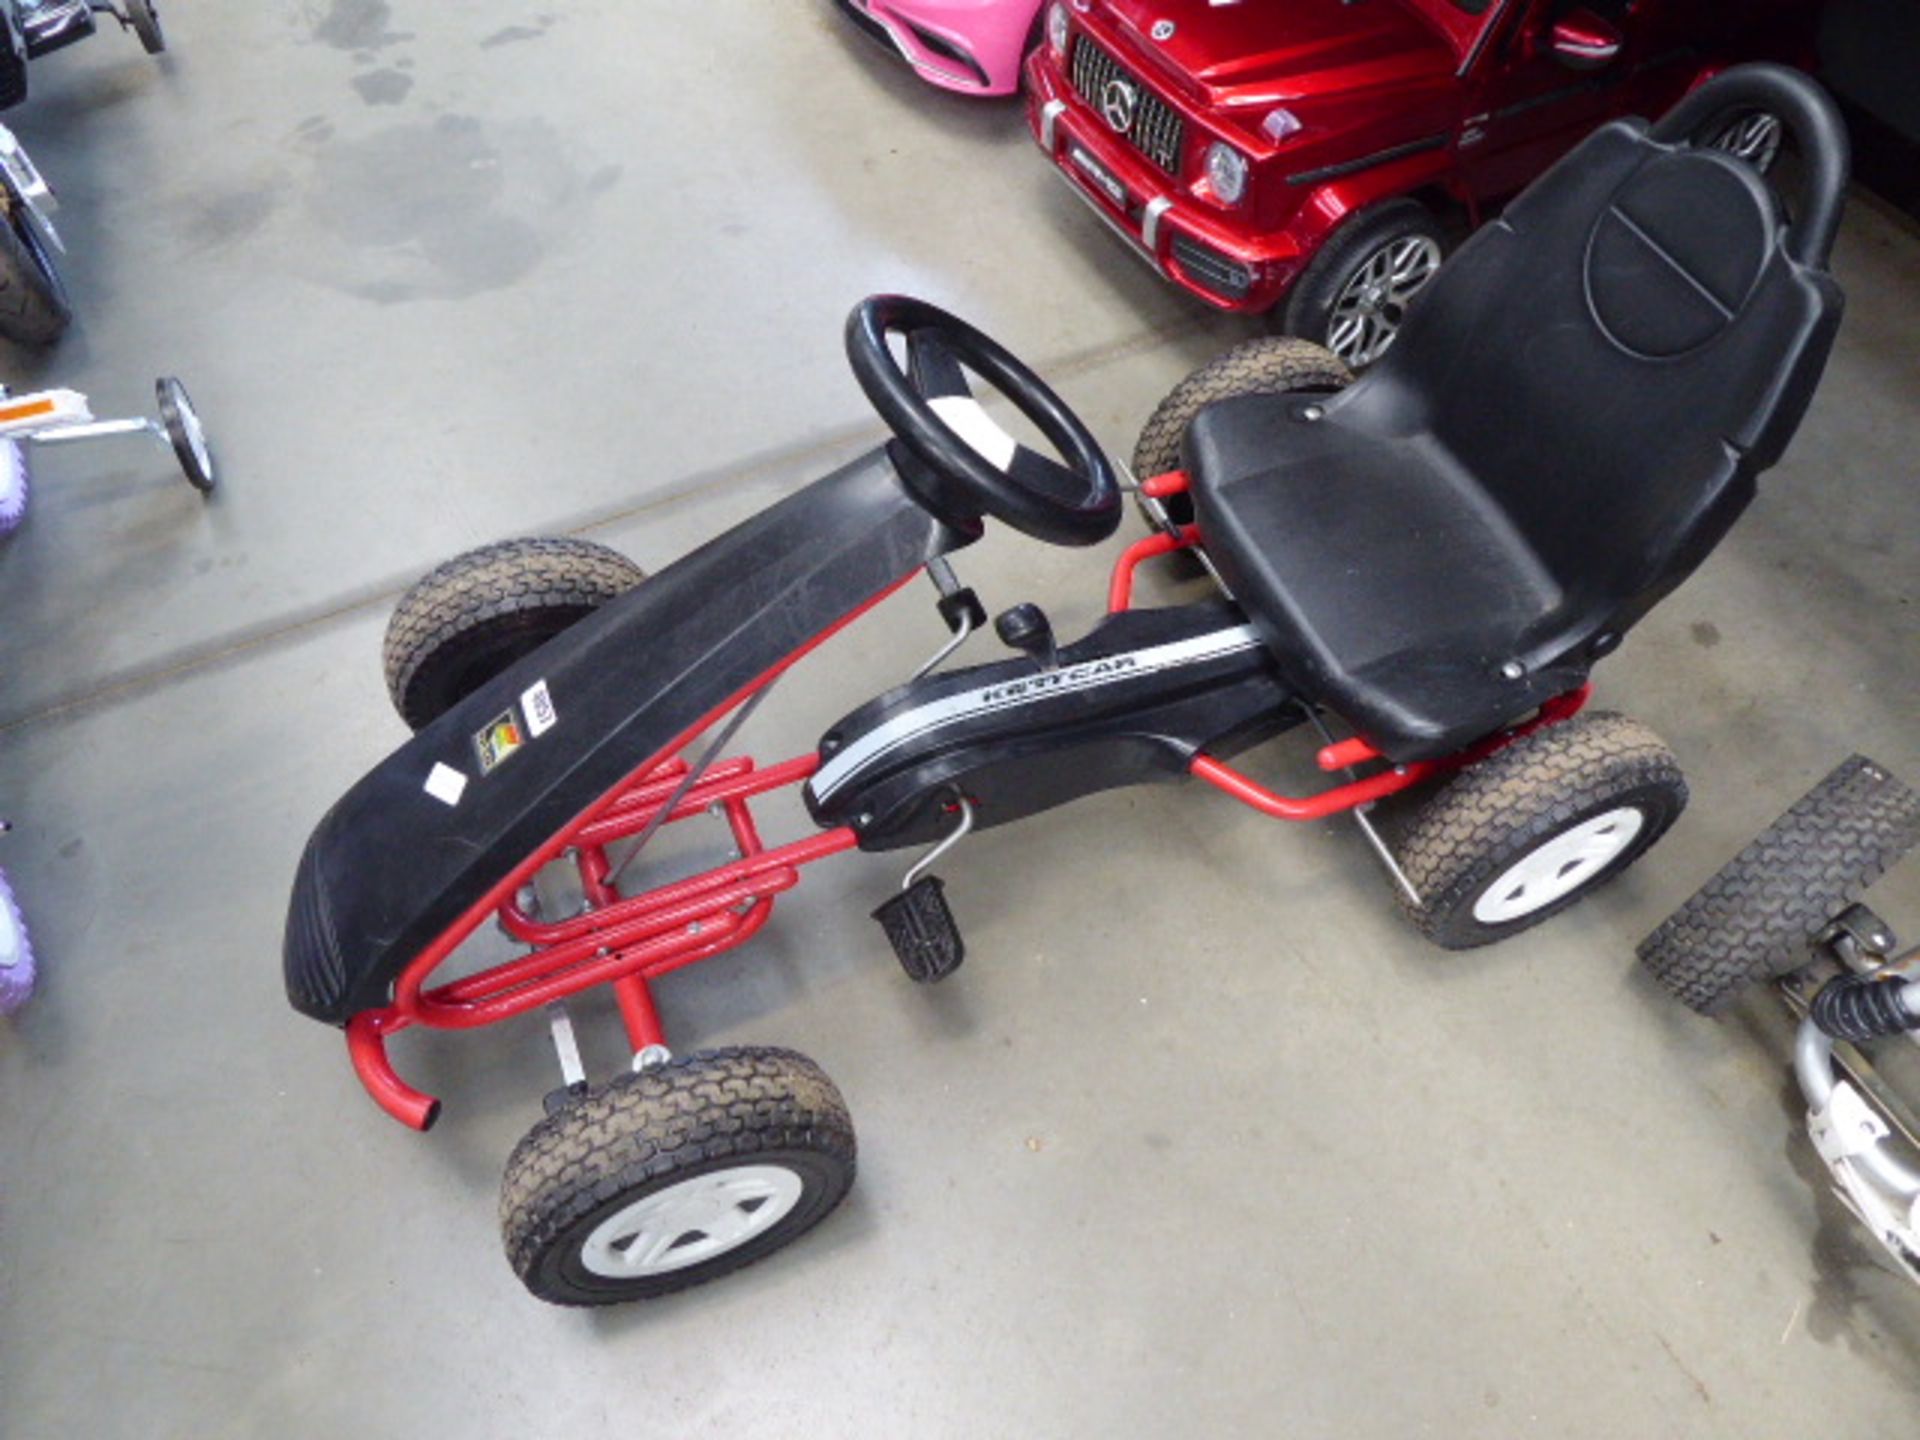 Keter red and black 4 wheeled go-kart